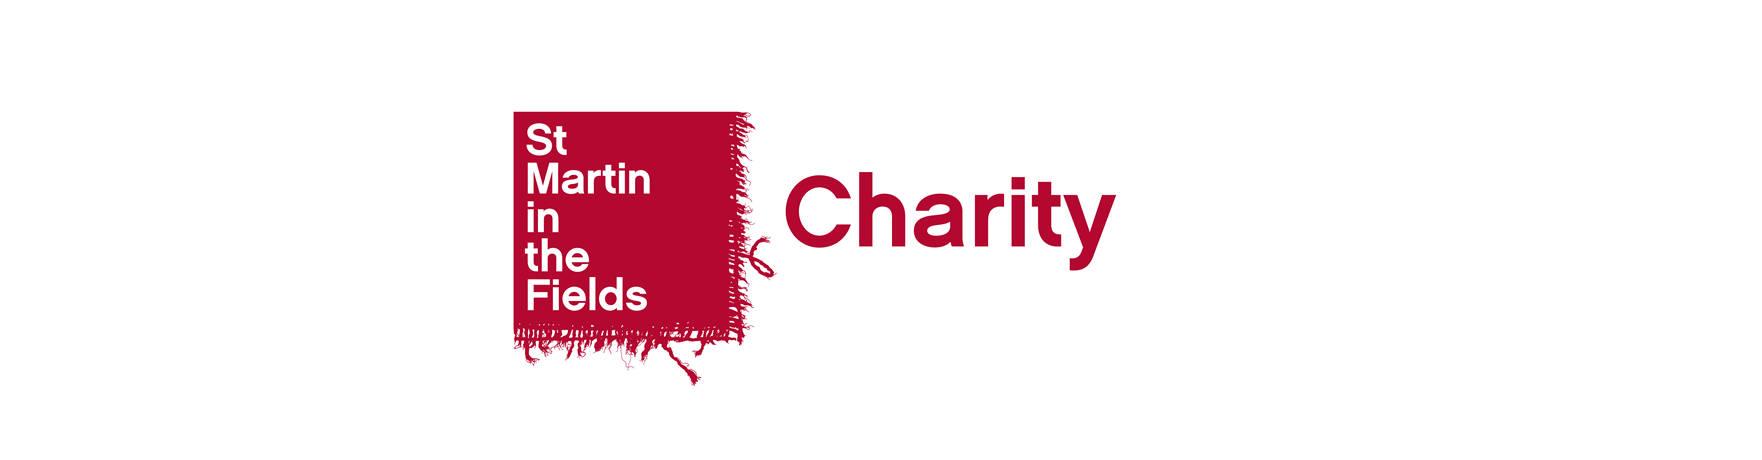 Over £1.5 Million Awarded To Six Charities Across The UK